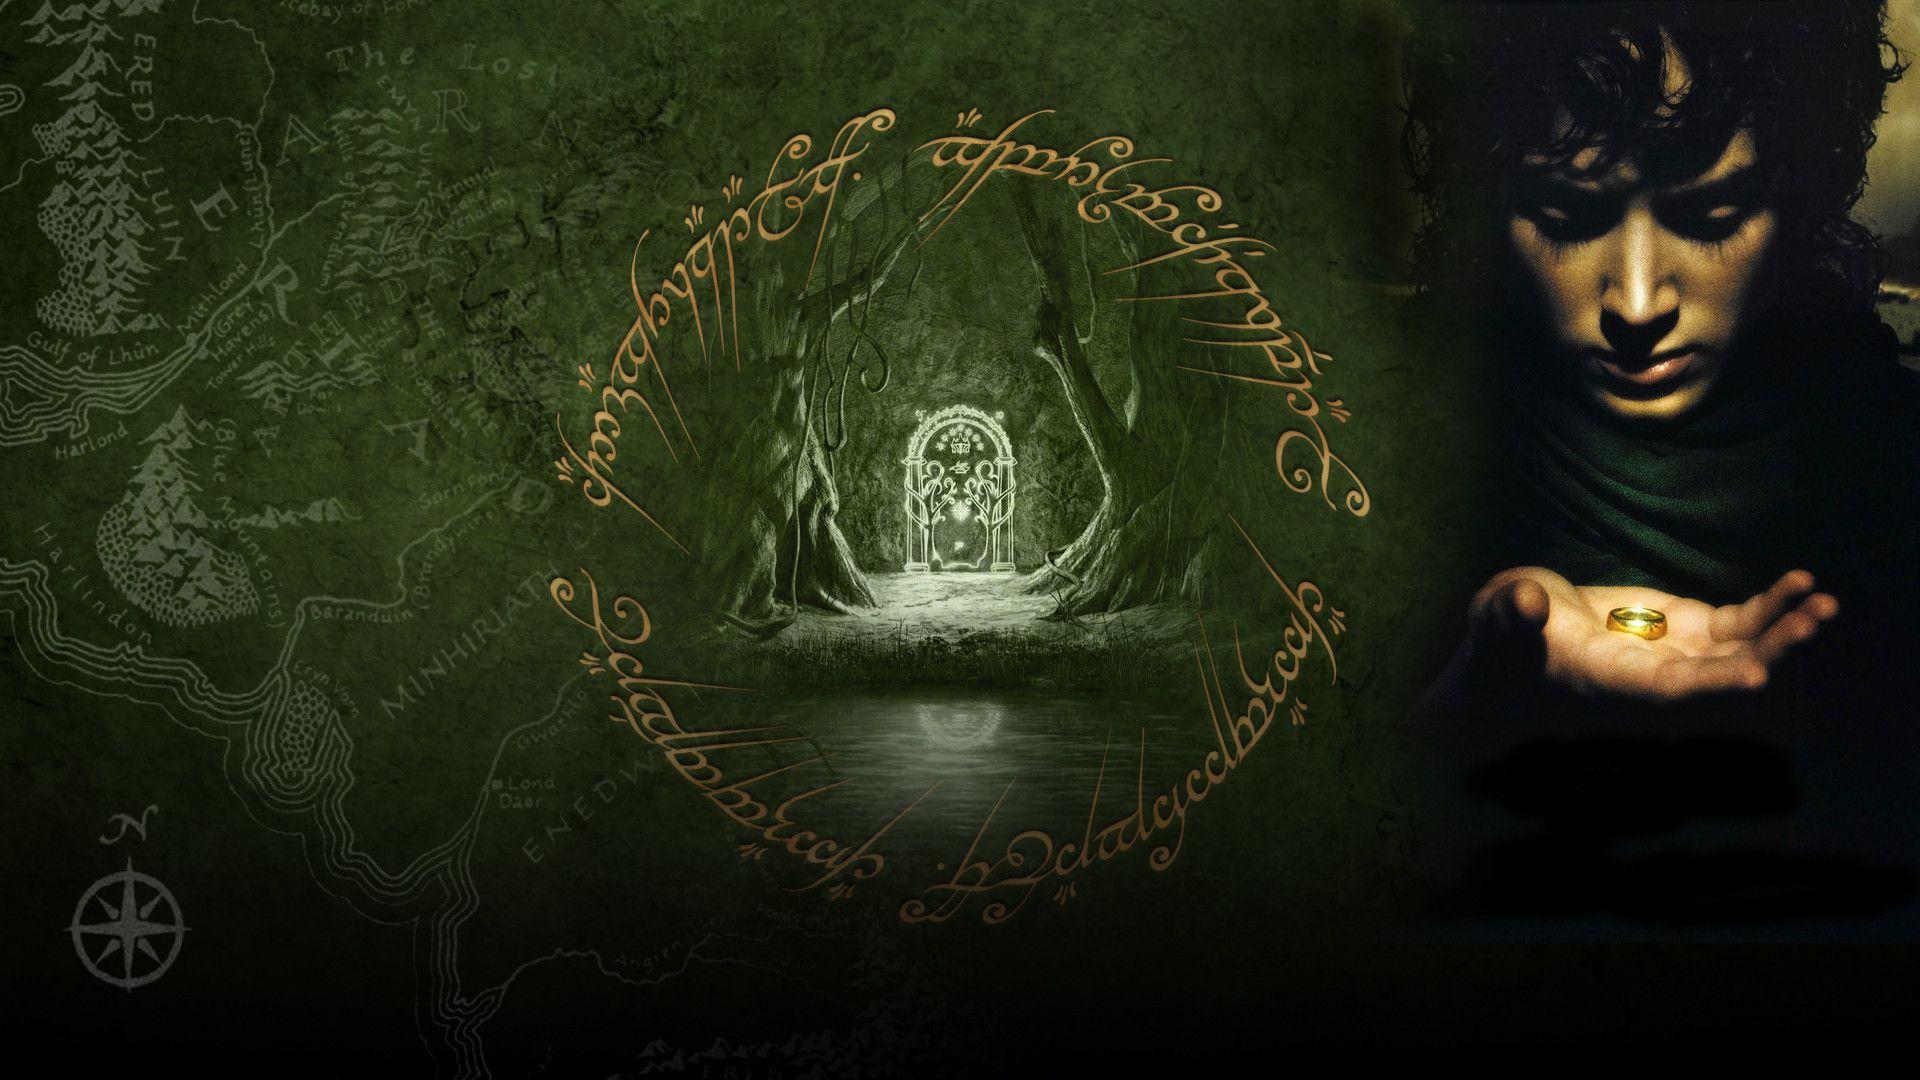 Wallpaper Blink Lord of the Rings: The Return of the King